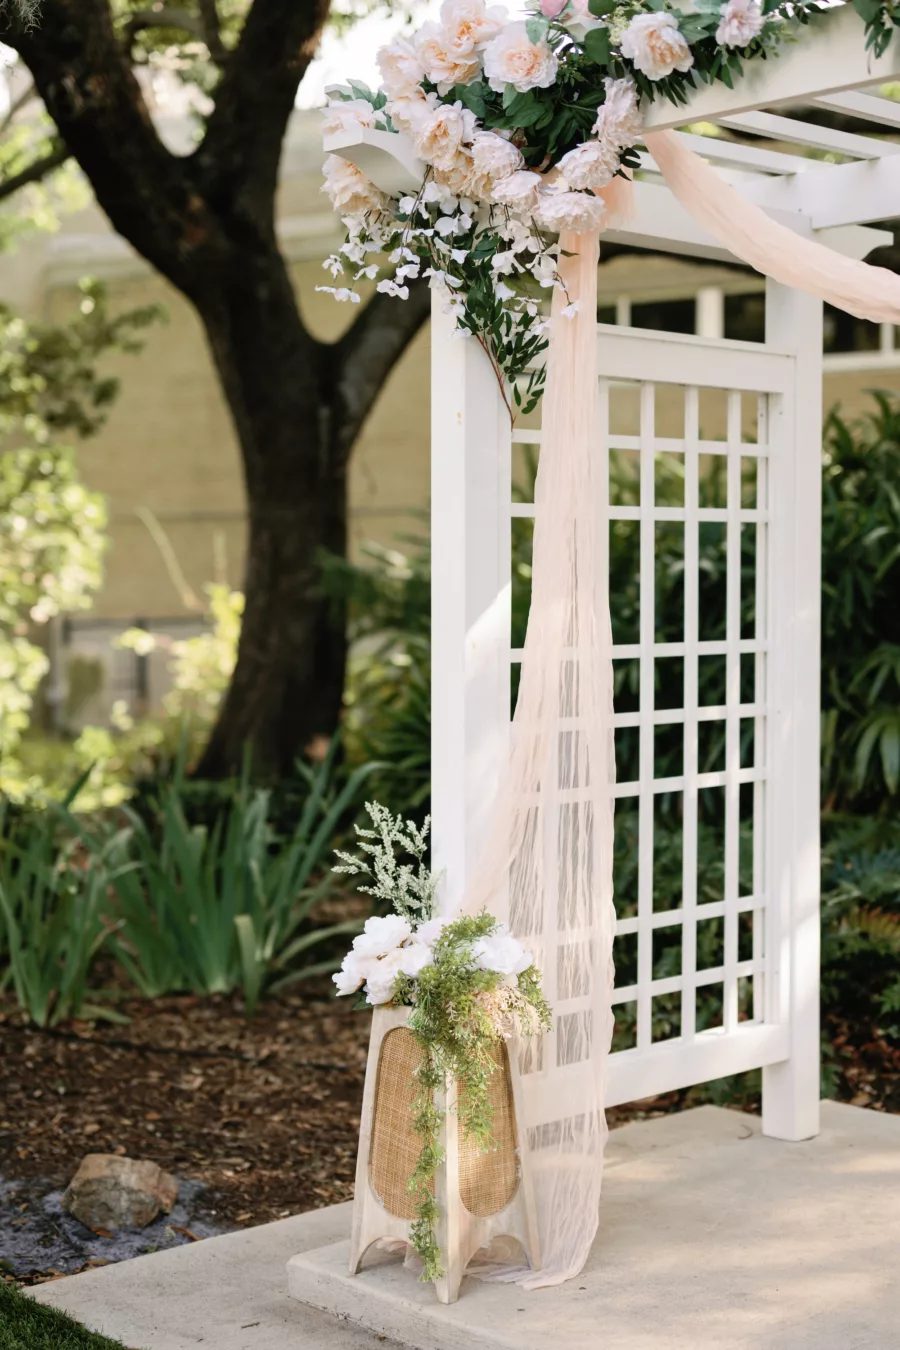 Romantic Neutral Wedding Ceremony Pergola Altar Decor Inspiration with Dainty Drapery, White and Pink Garden Roses